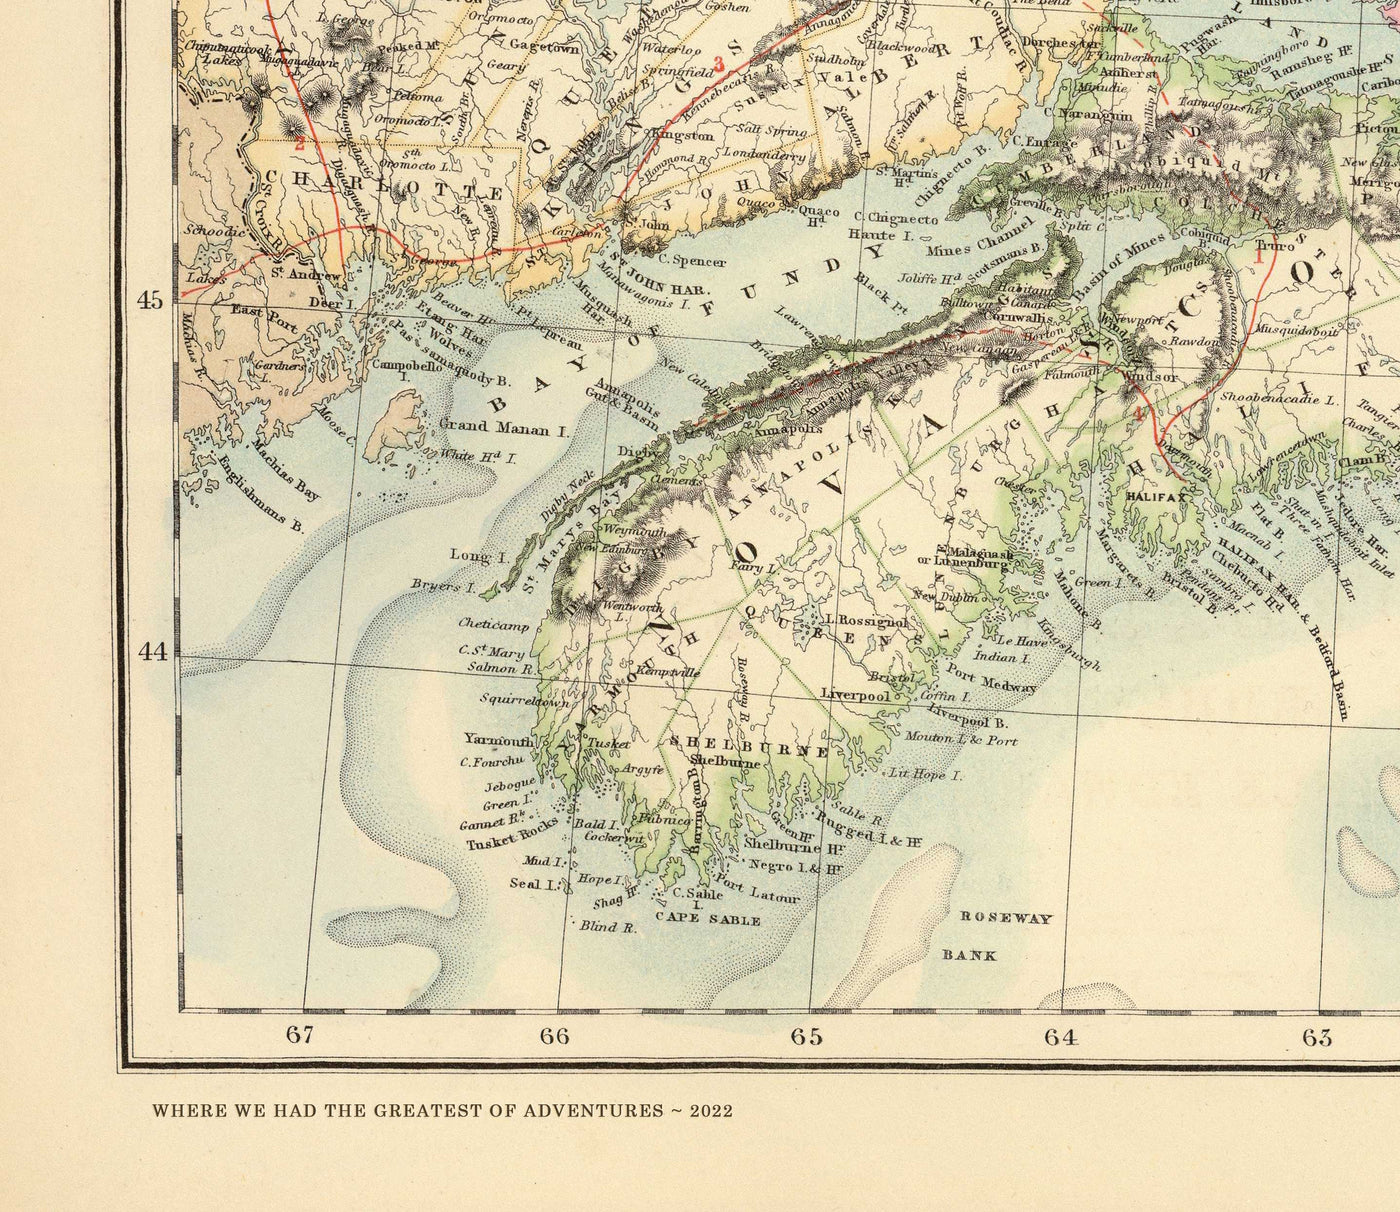 Old Map of the Ports & Harbours of Northern USA, 1872 by Fullarton - Hudson River, Boston, Philadelphia, New York, Portland